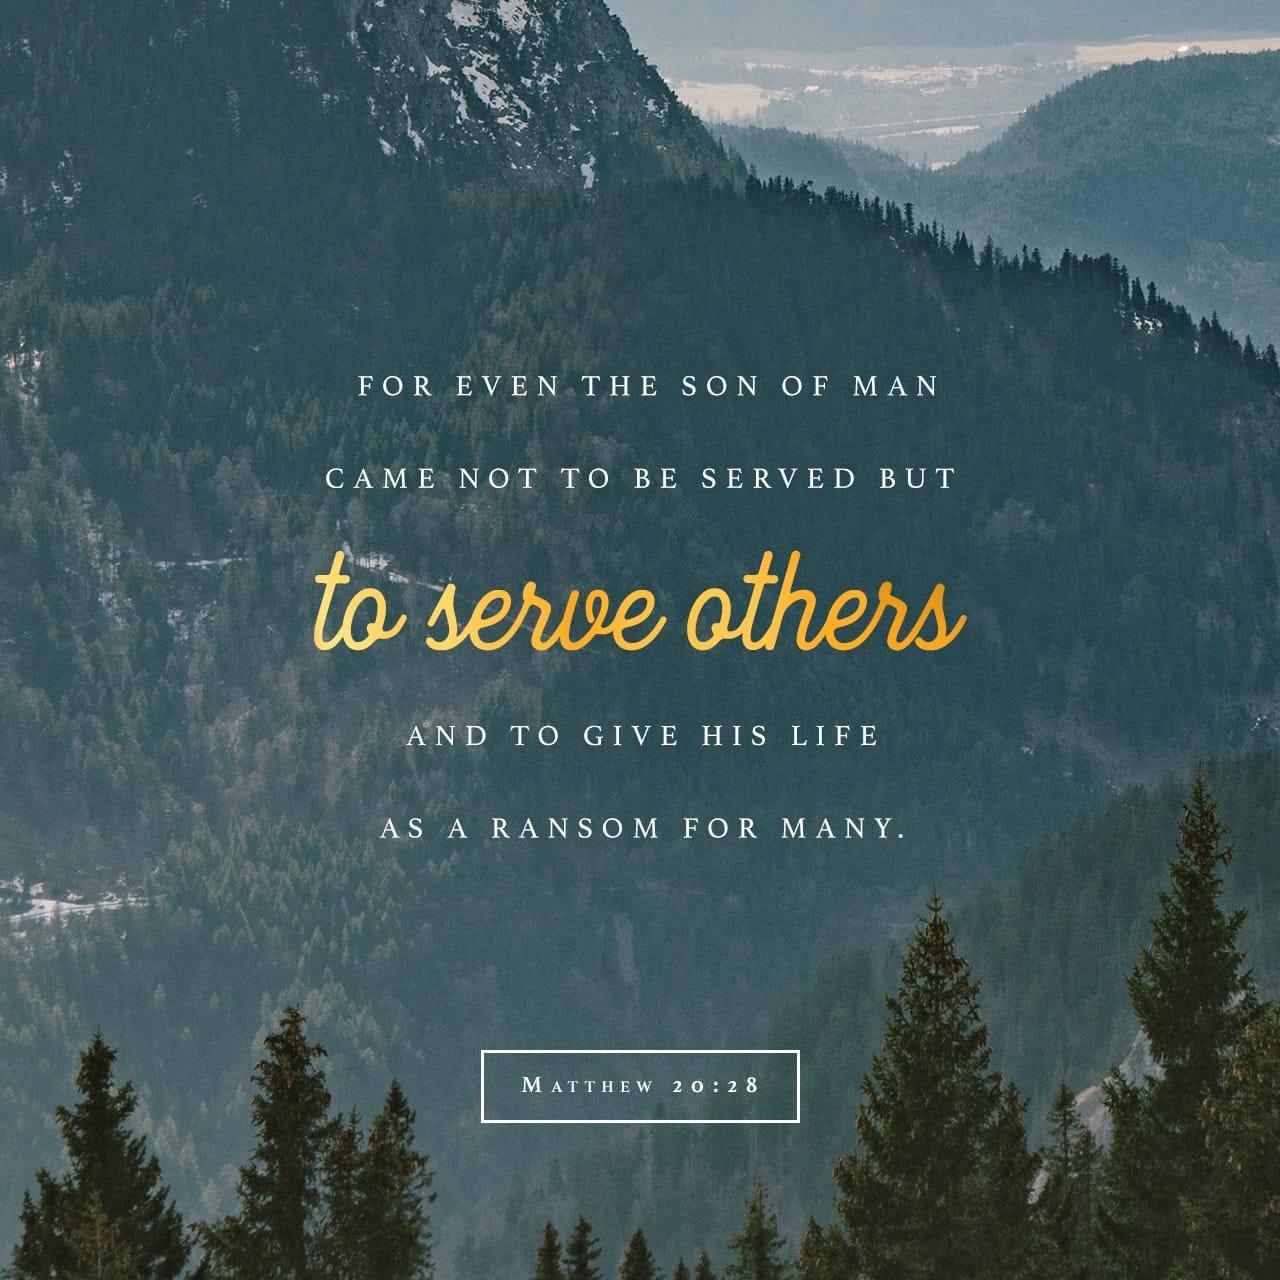 Bible Verse of the Day - day 92 - image 9144 (Matthew 20:17-28)